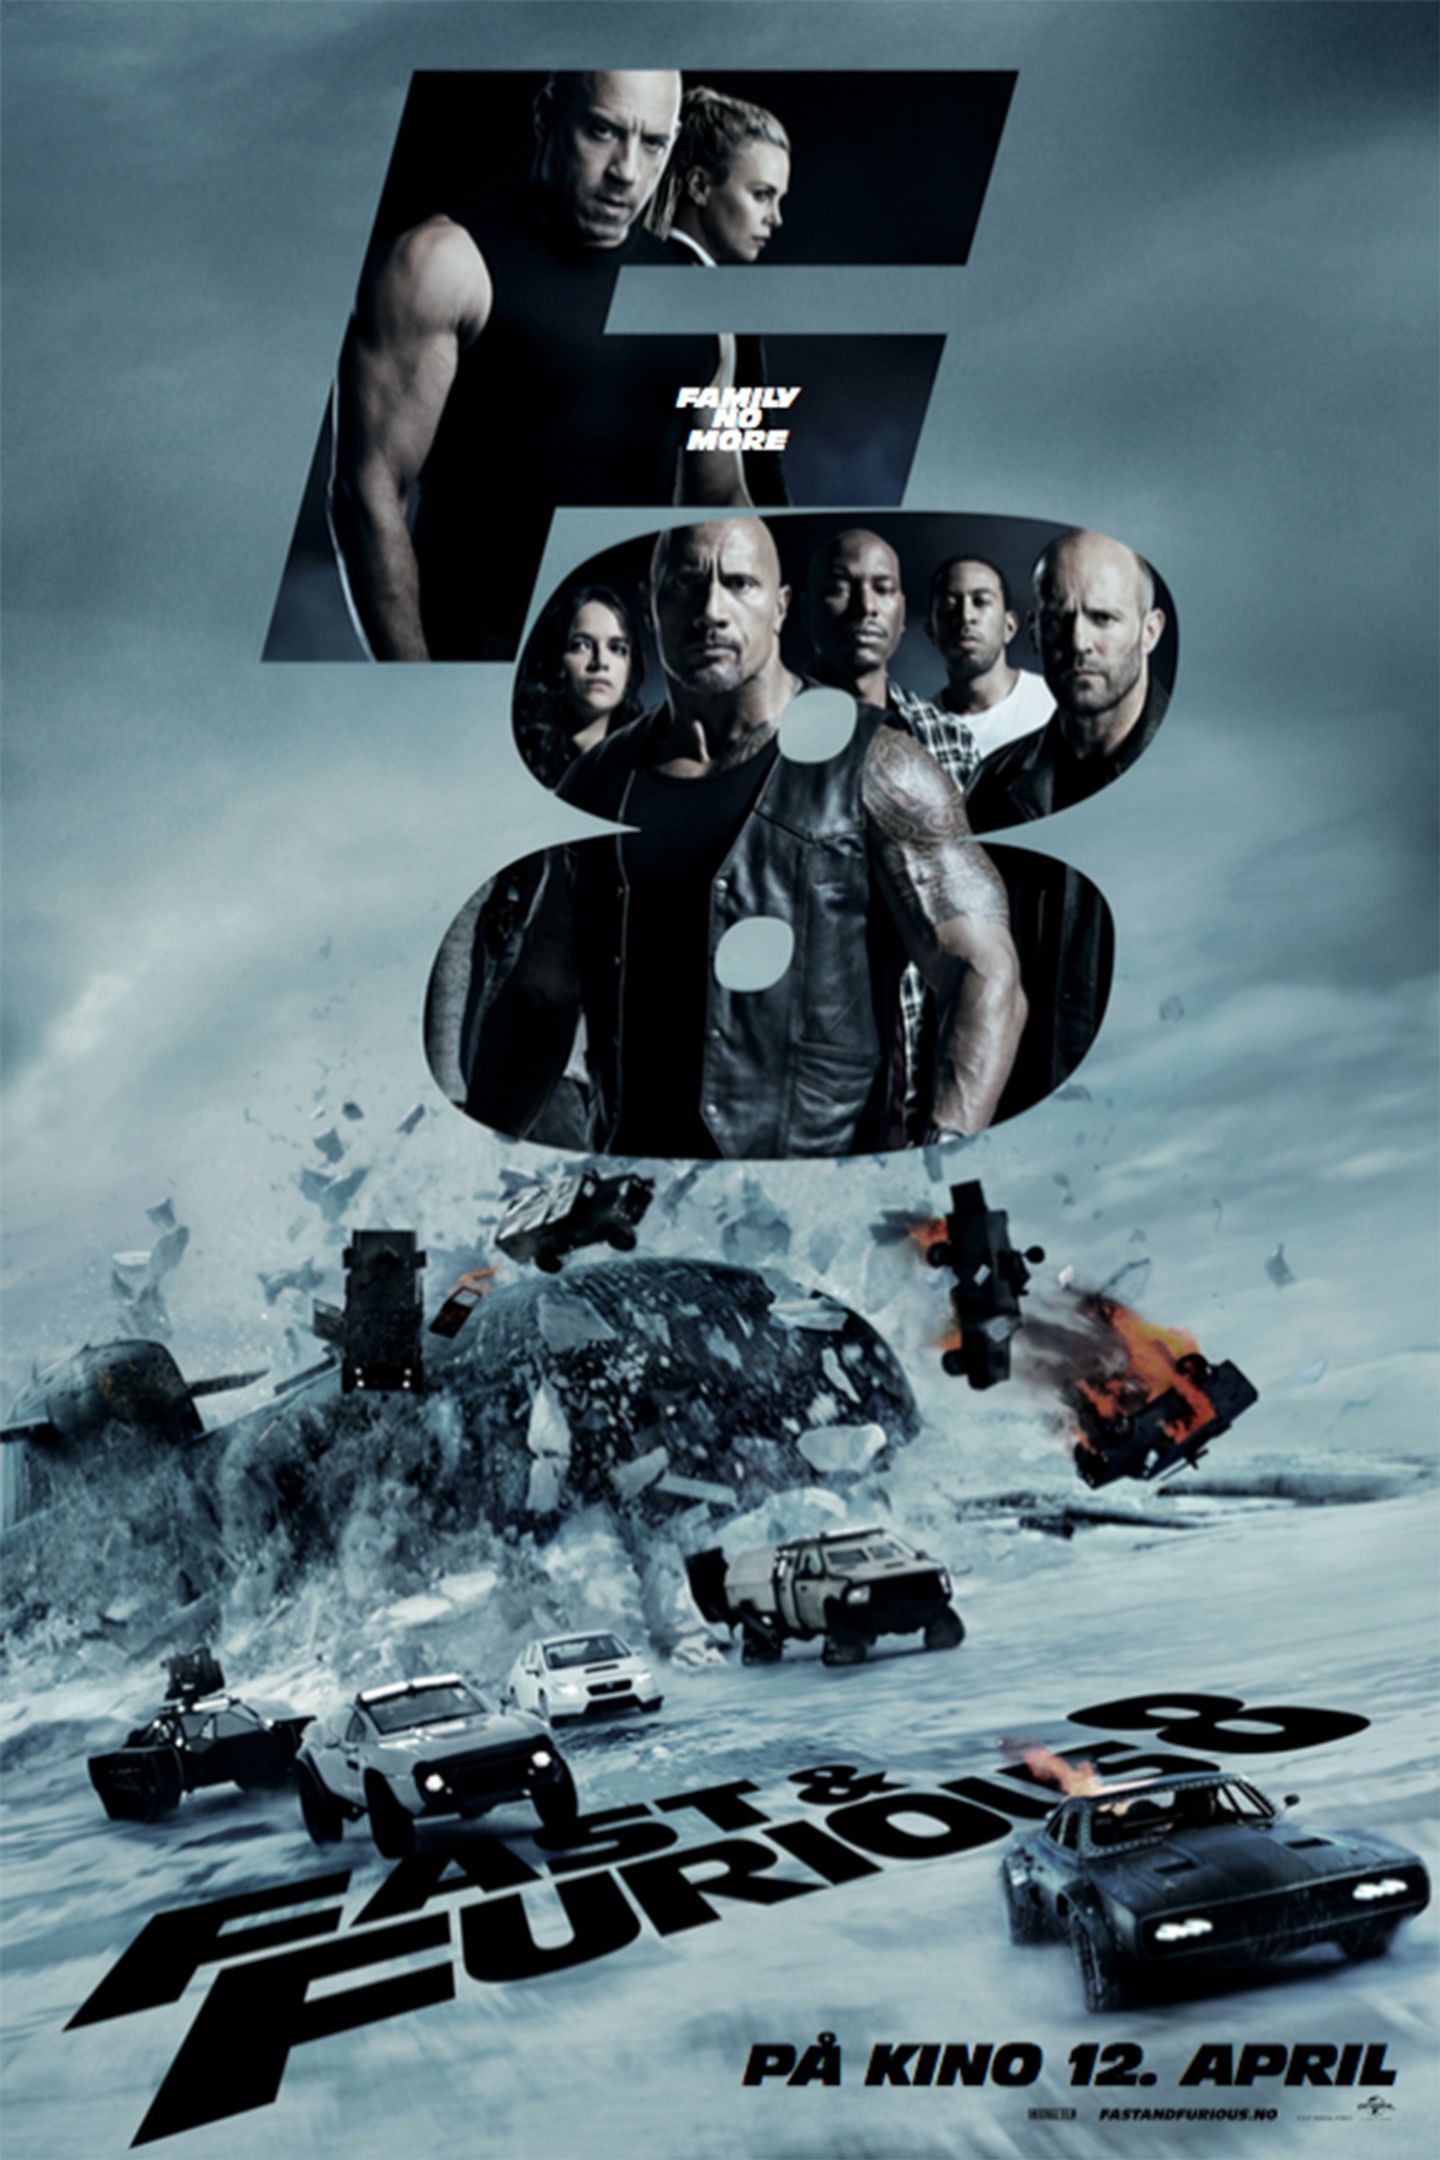 Plakat for 'Fast & Furious 8'